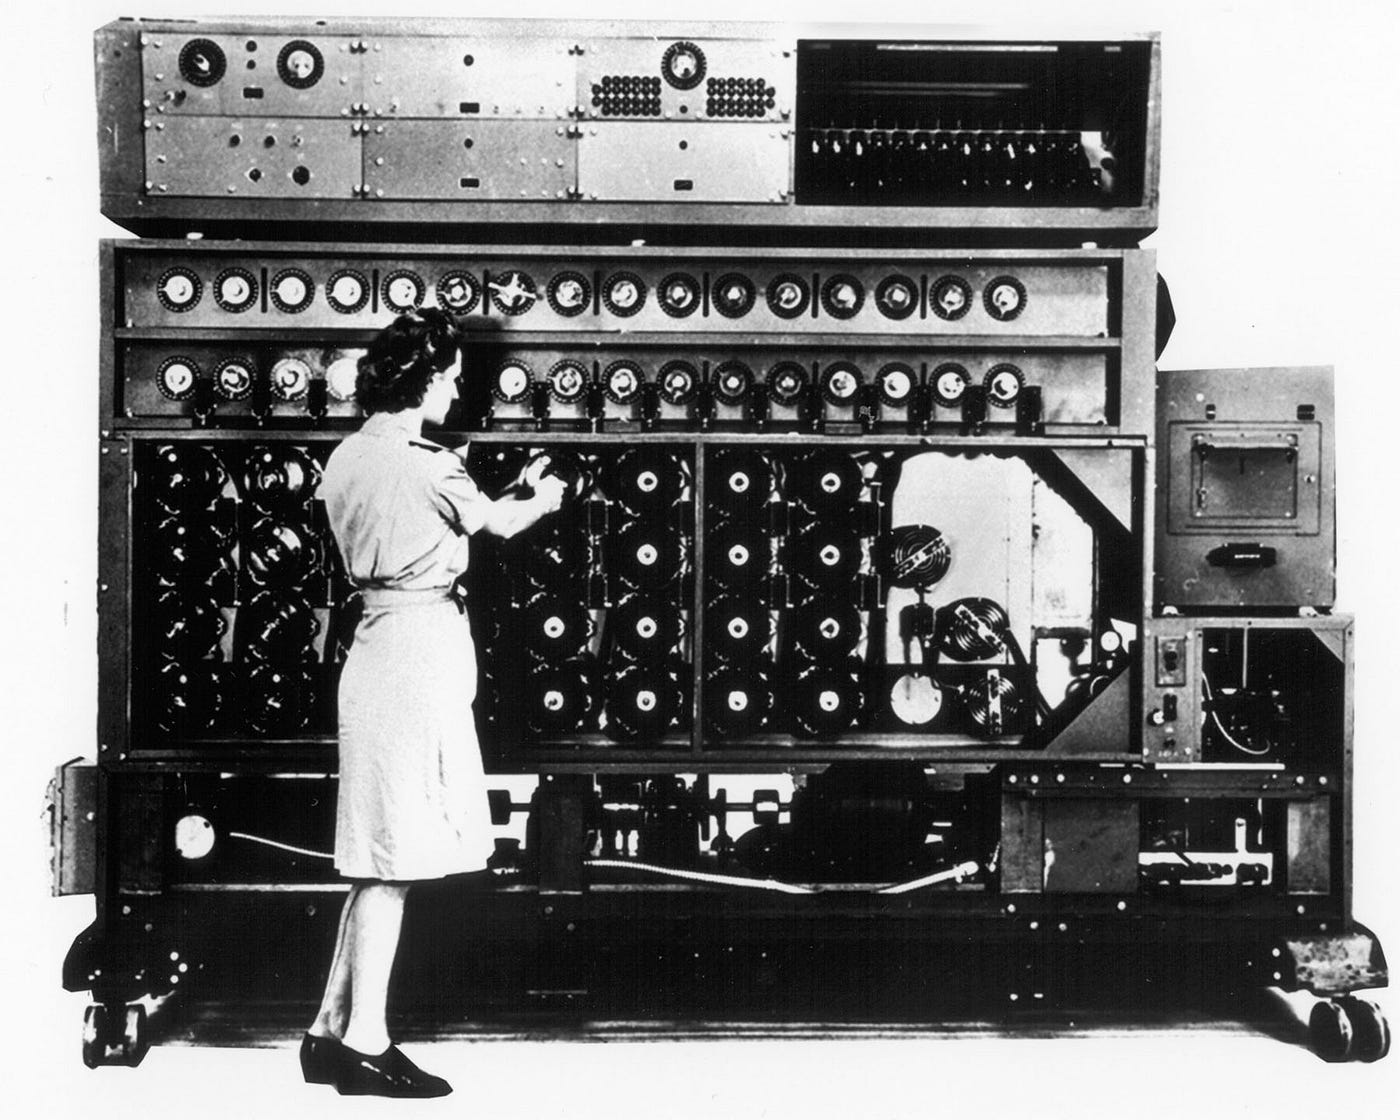 Alan Turing's Most Important Machine Was Never Built